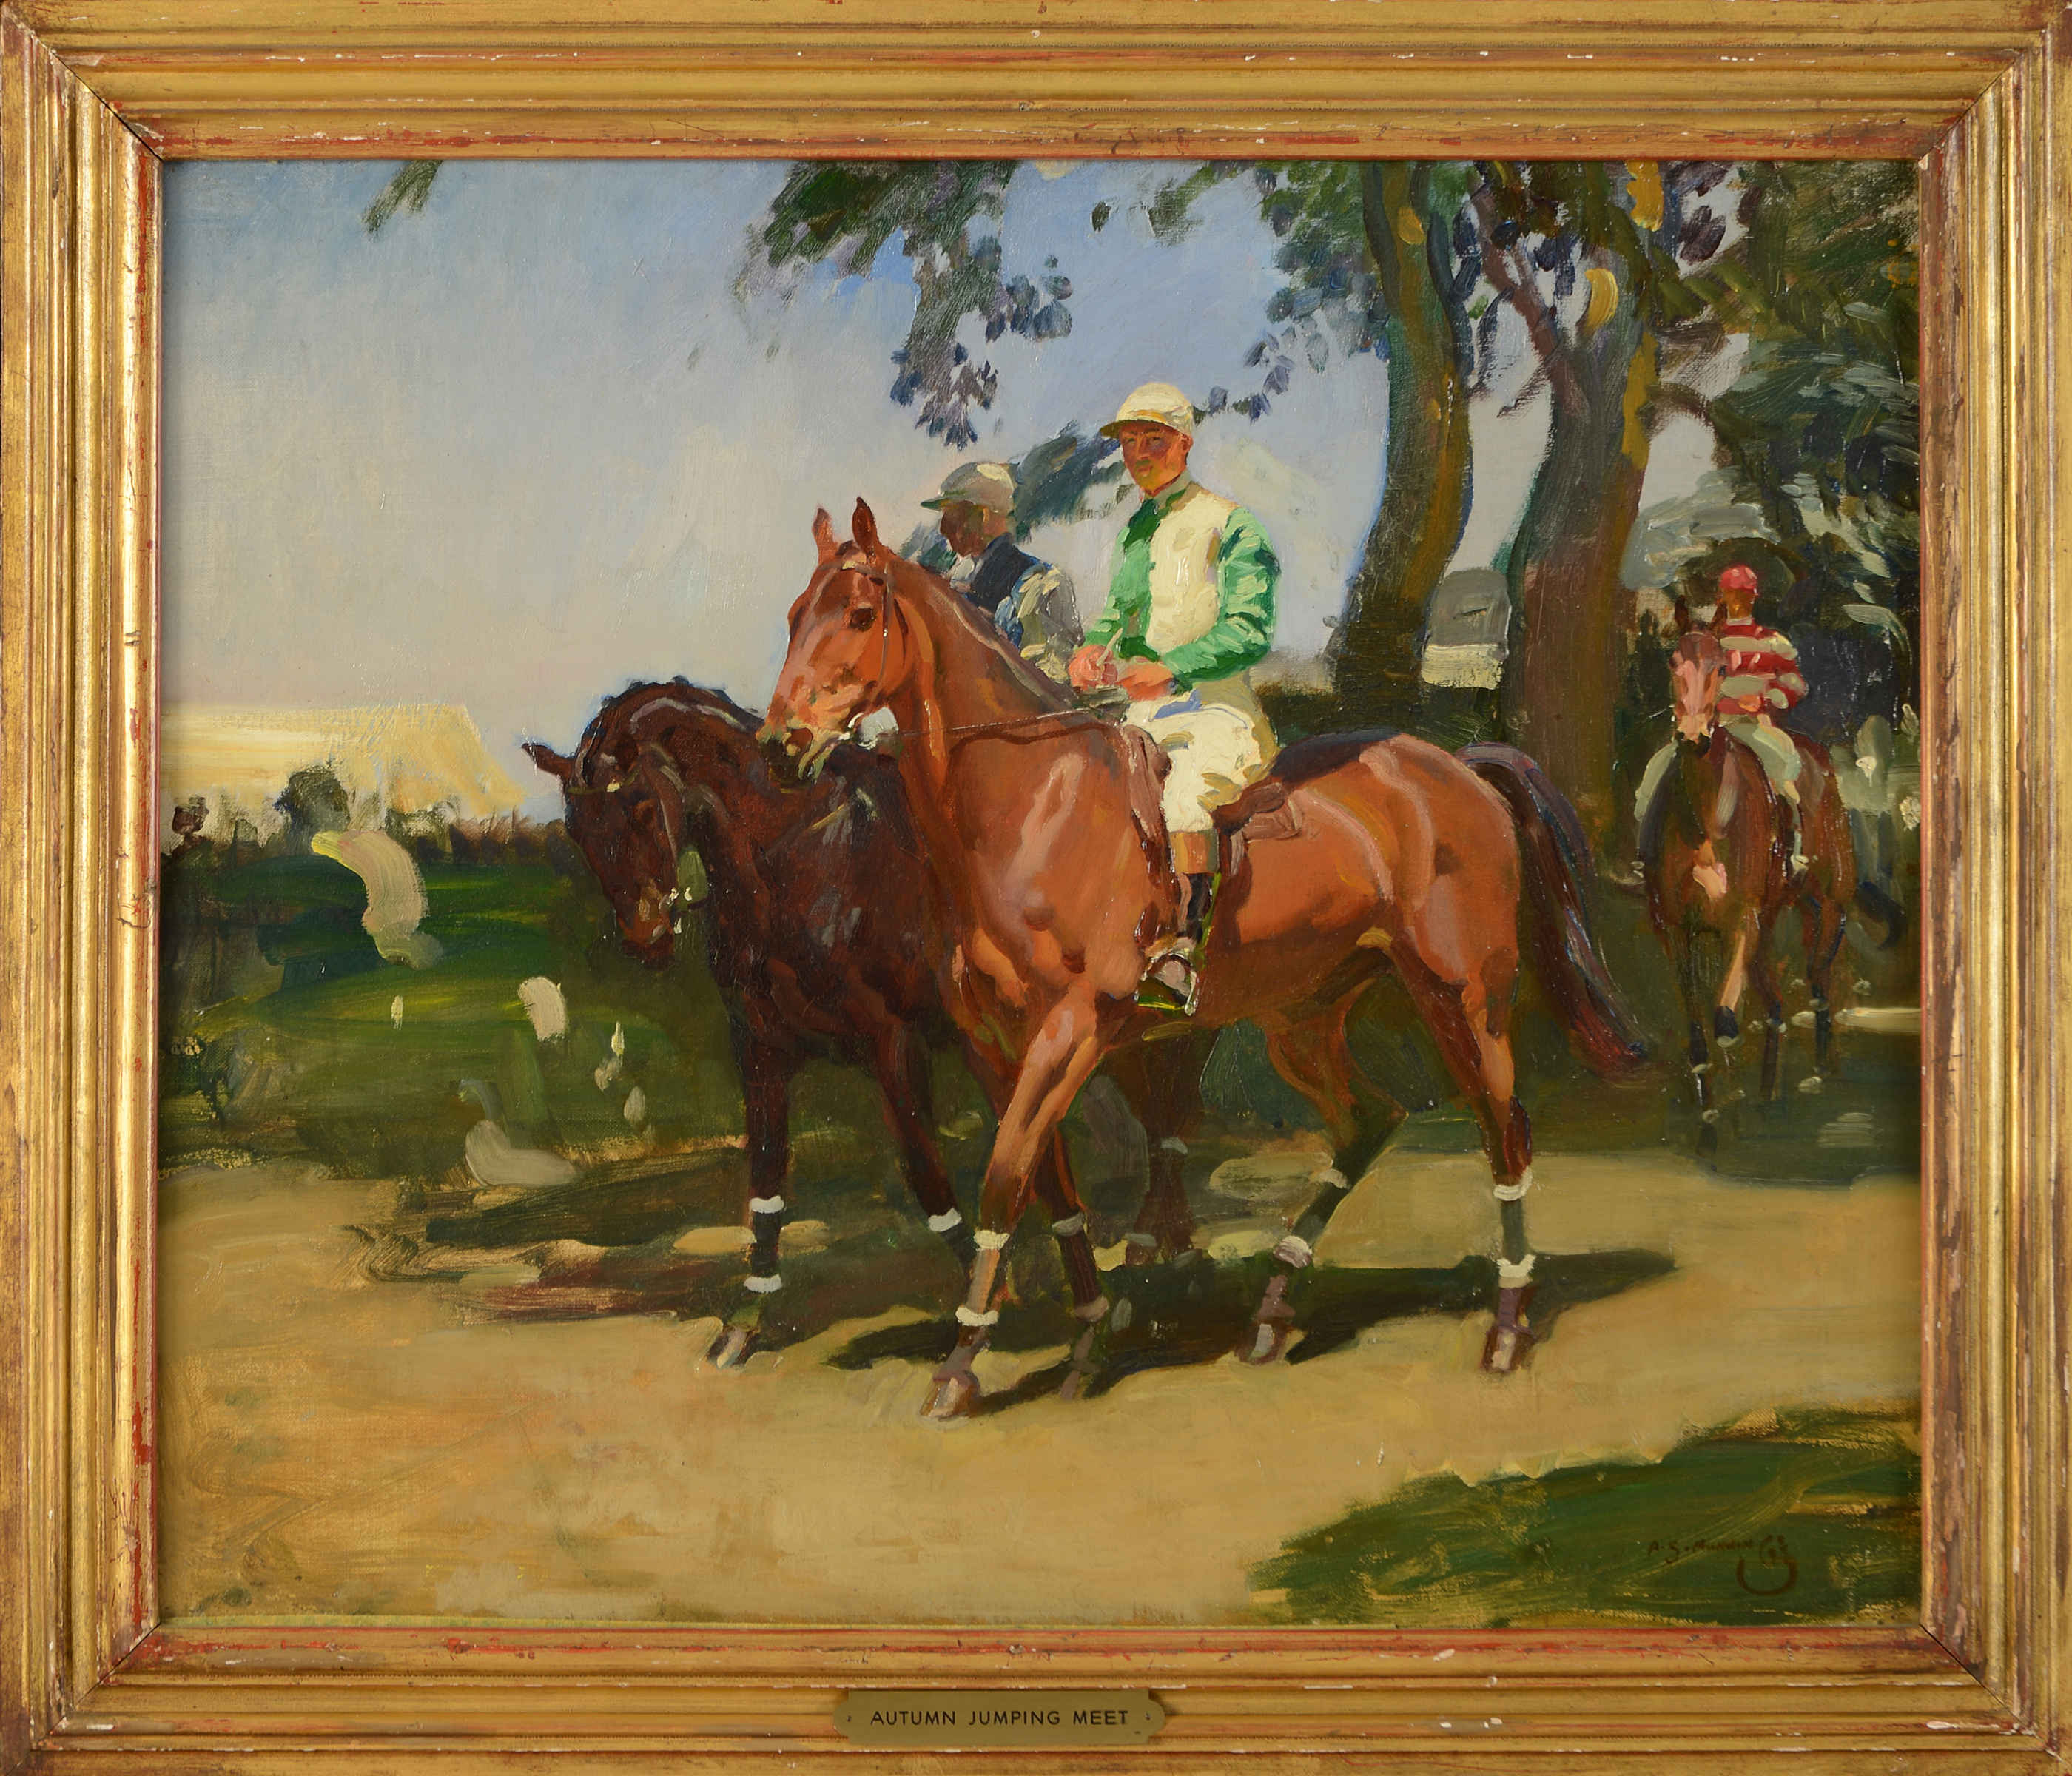 1964.4.1: Autumn Jumping Meet by Sir Alfred J. Munnings (1878-1959), Oil on canvas, Gift: Mrs. Francis P. Garvan 